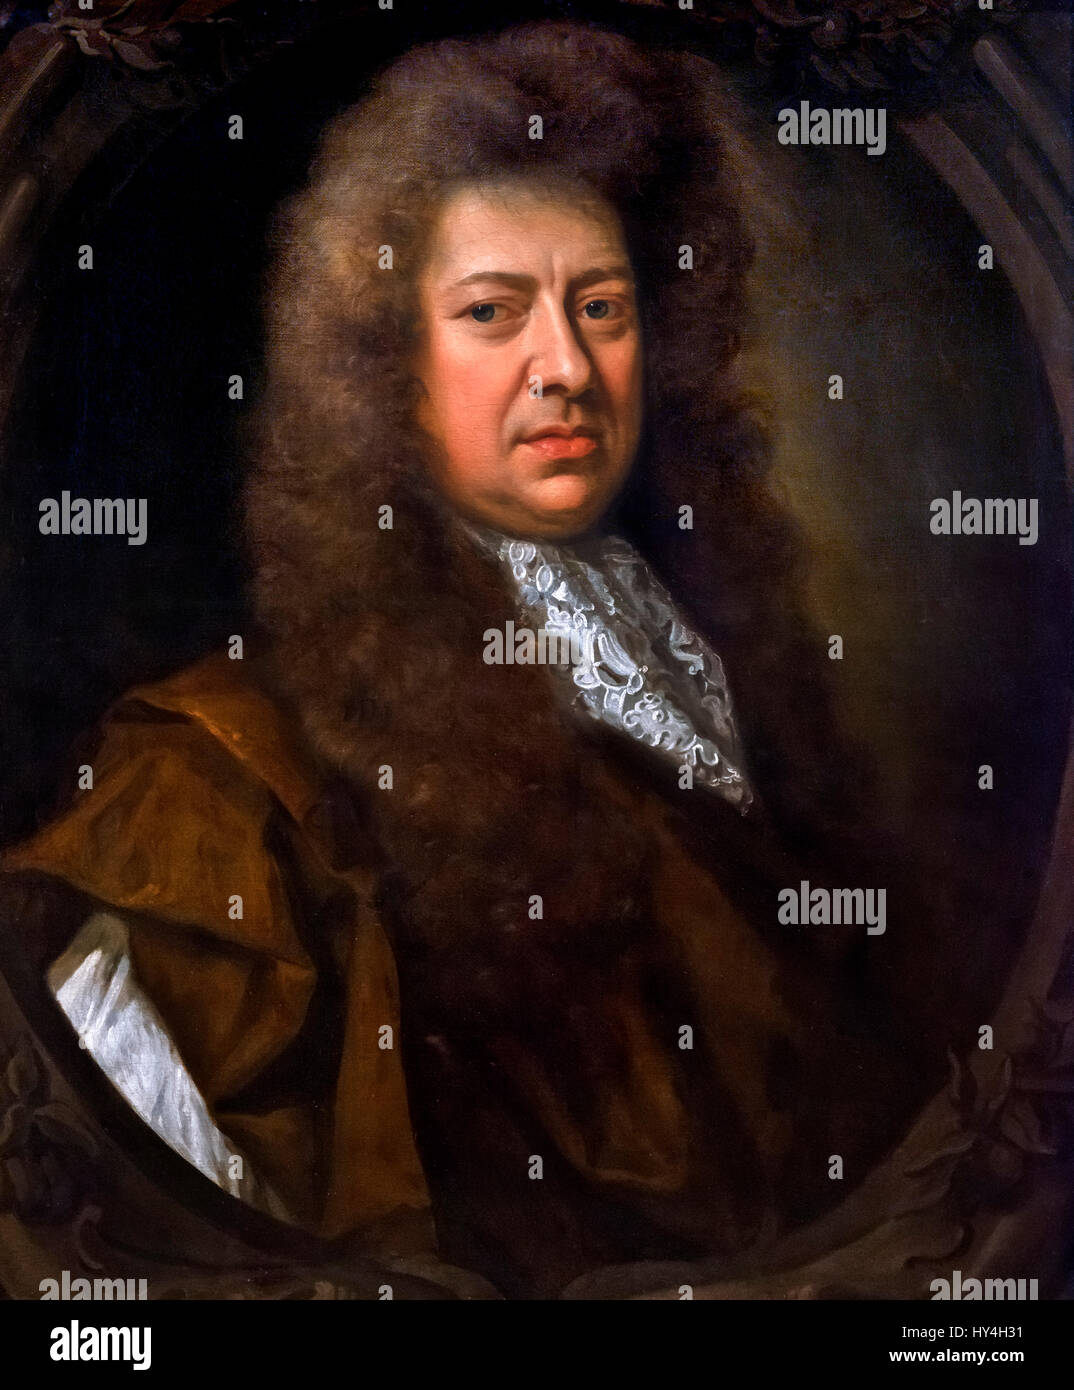 Samuel Pepys. Portrait of the 17thC English diarist, Samuel Pepys (1633-1703), by Sir Geoffrey Kneller, oil on canvas, c.1689 Stock Photo